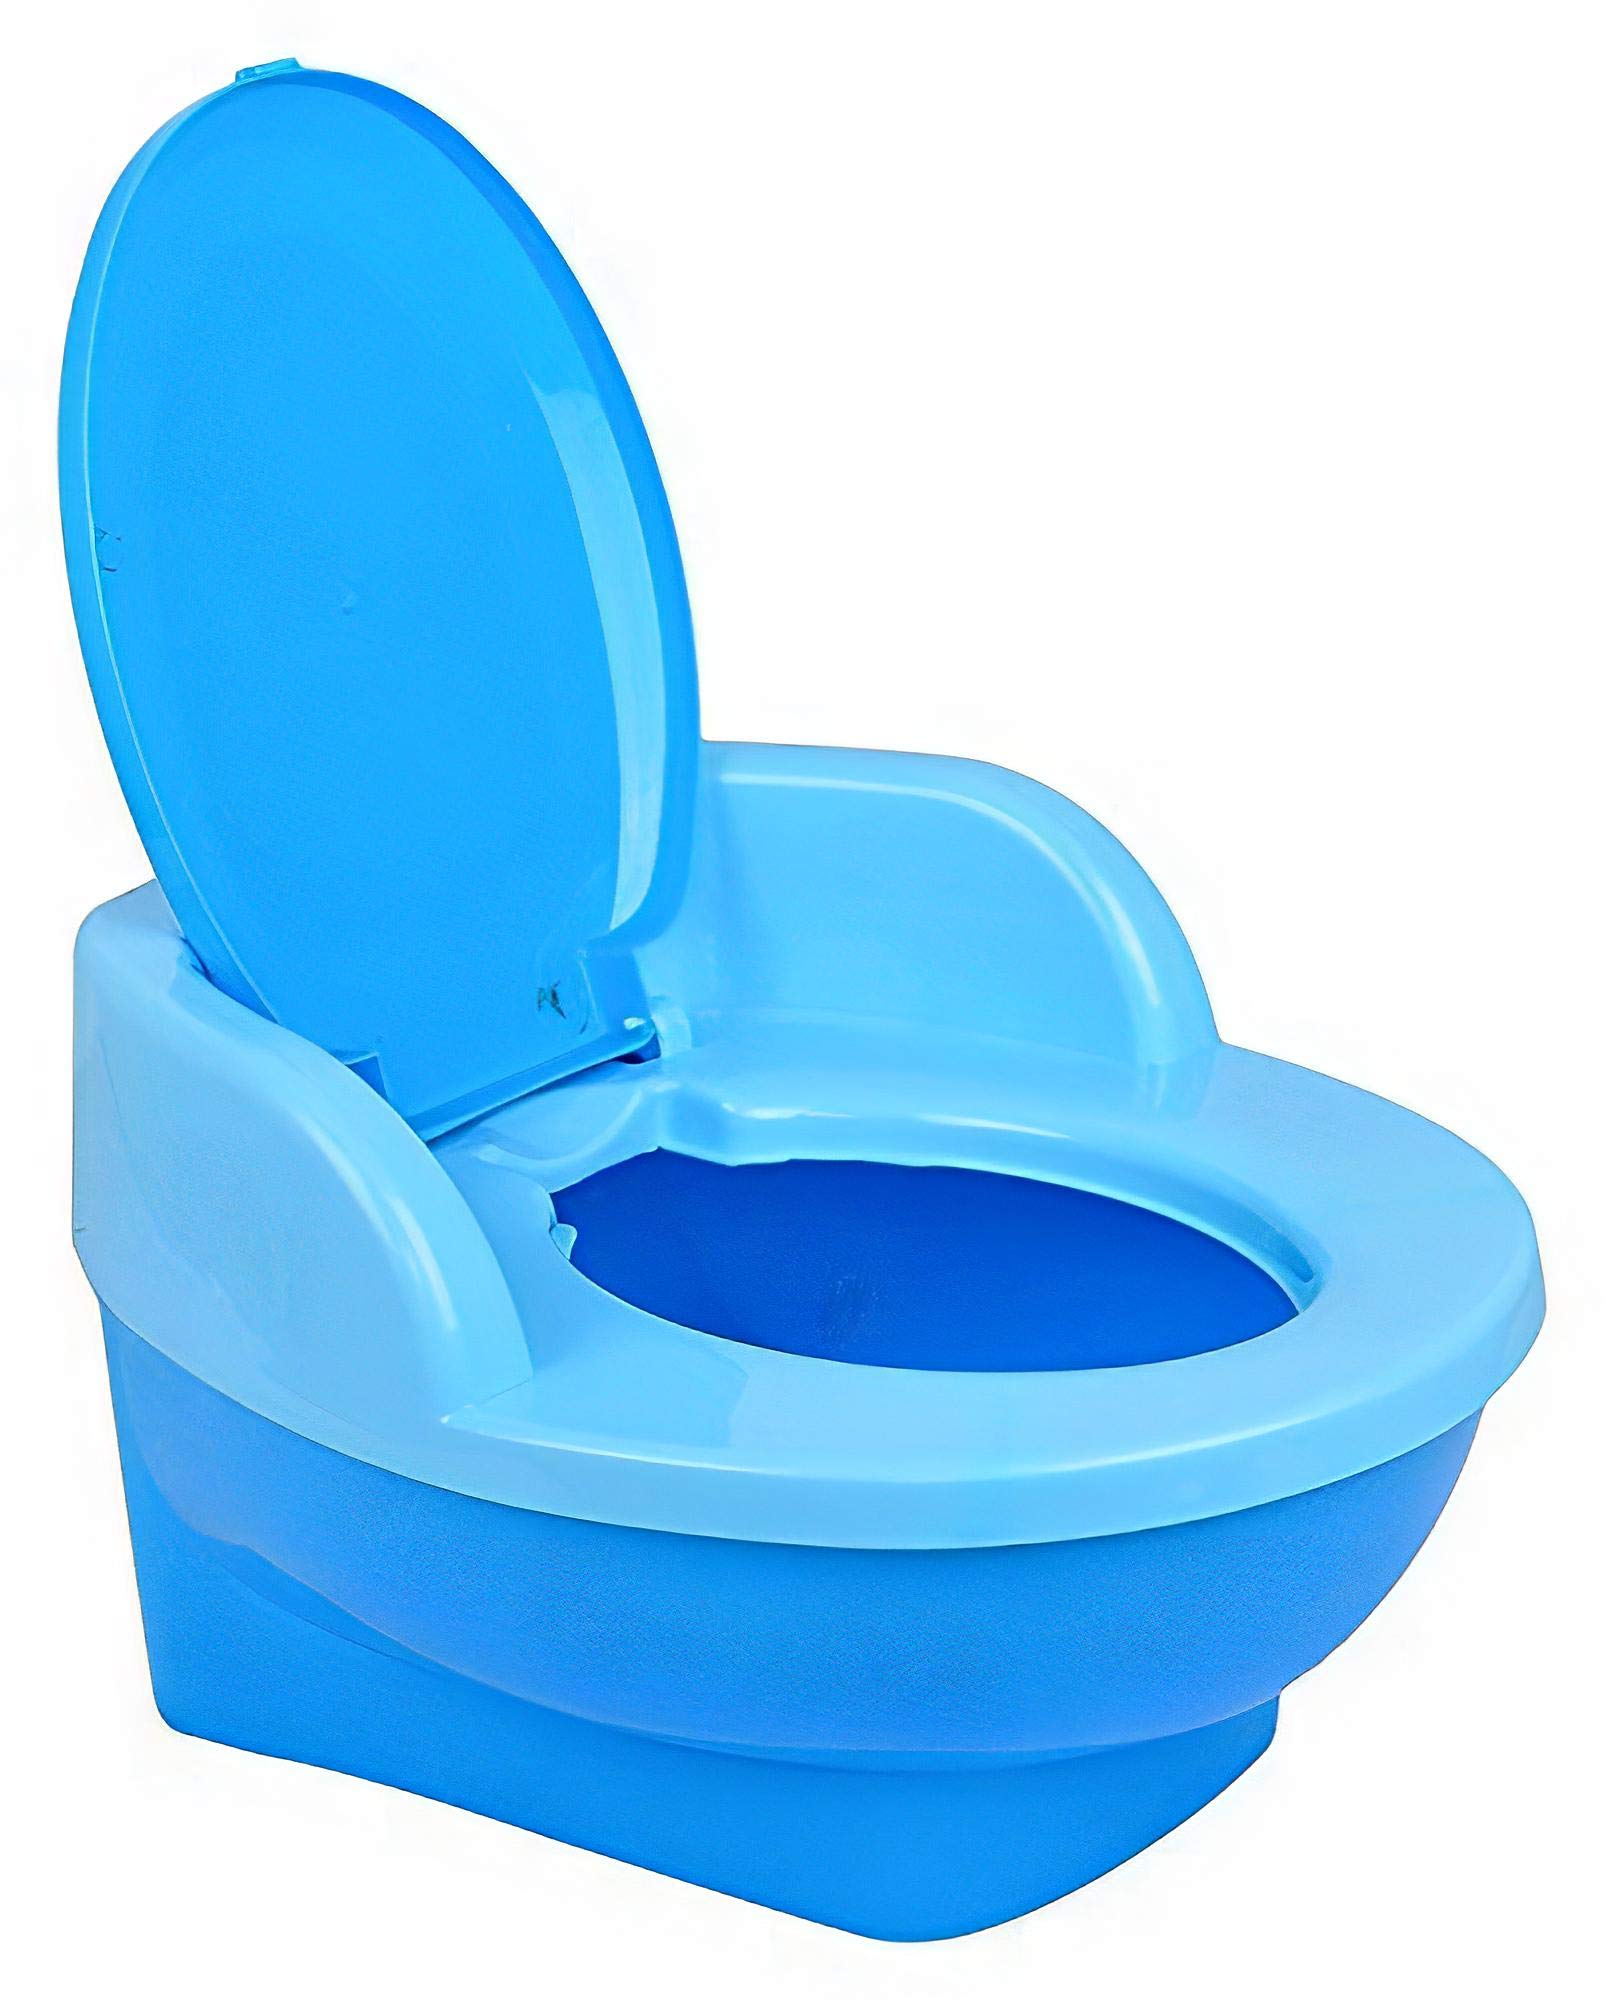 baby toilet seat jumia Xendercage baby toilet training potty seat with upper closing lid with